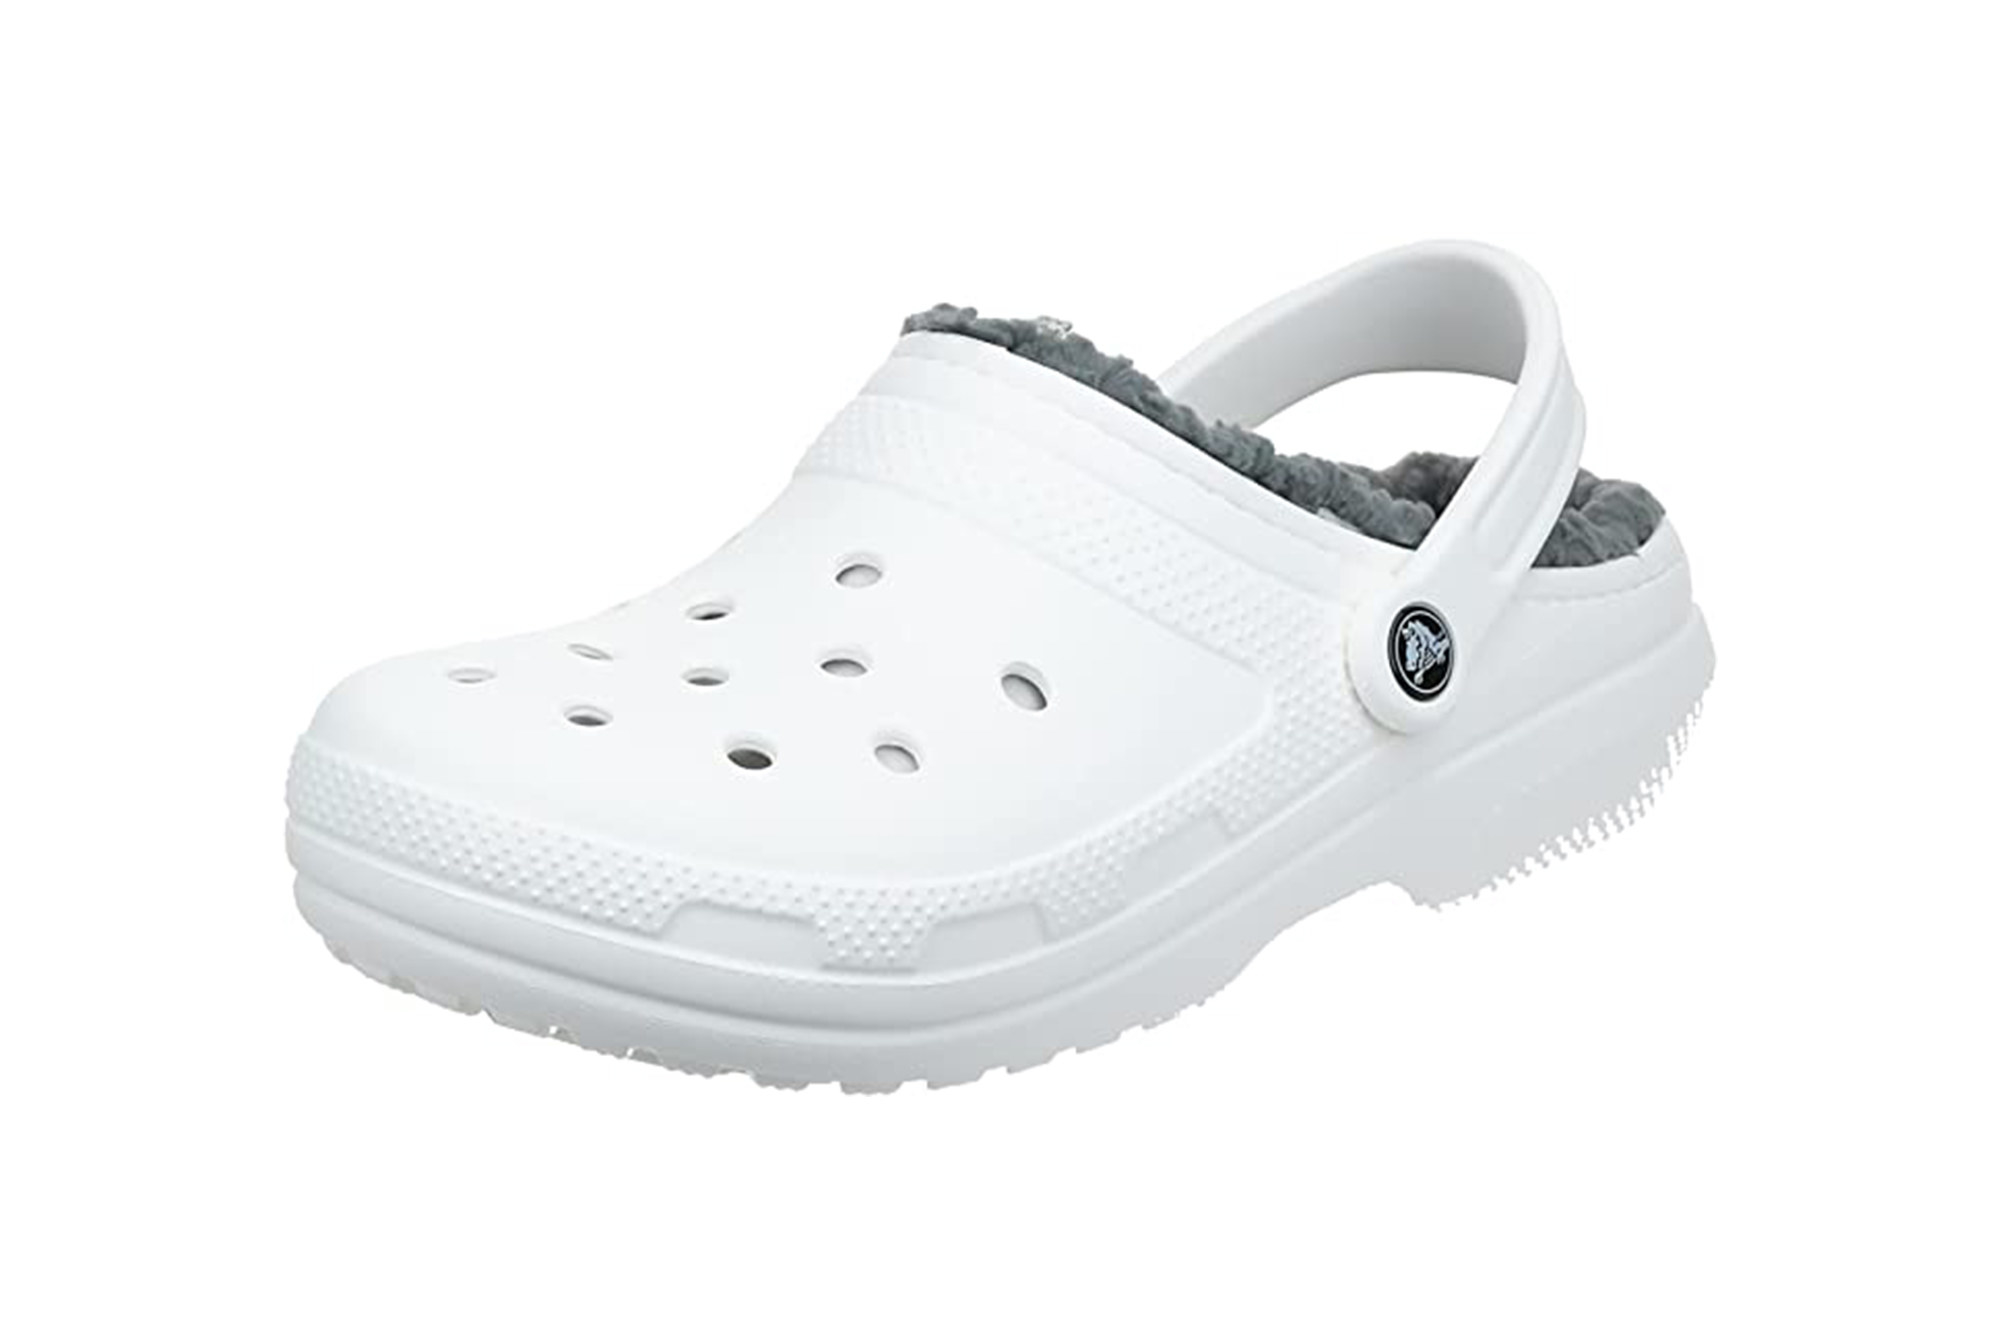 An image of Unisex Crocs lined clog